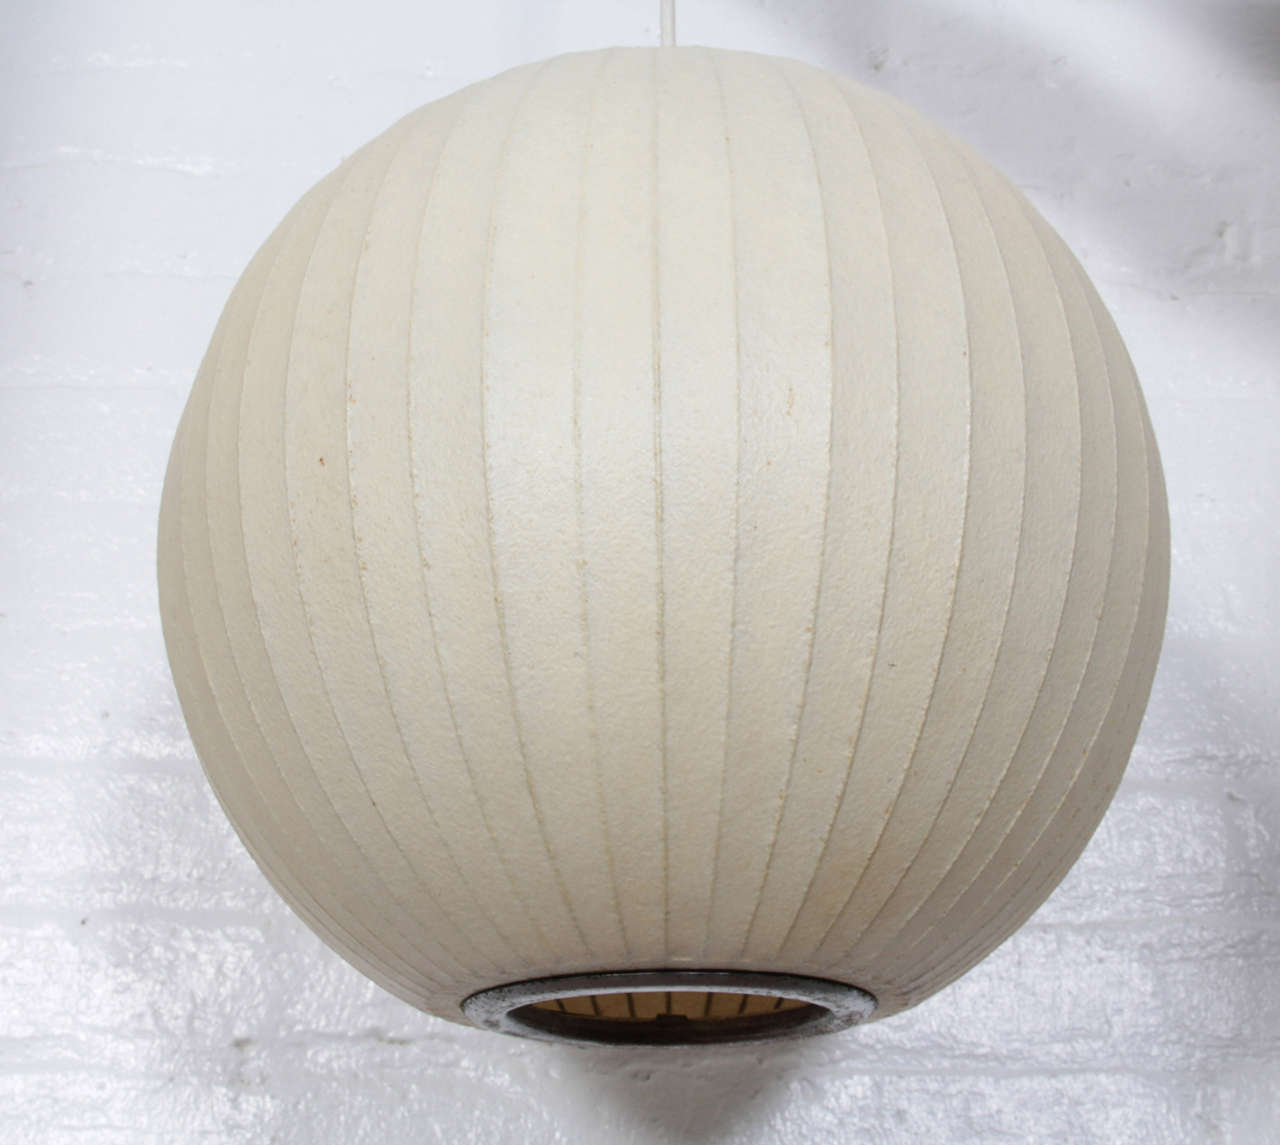 American George Nelson Fiberglass Bubble Lamp, Manufactured by Howard Miller